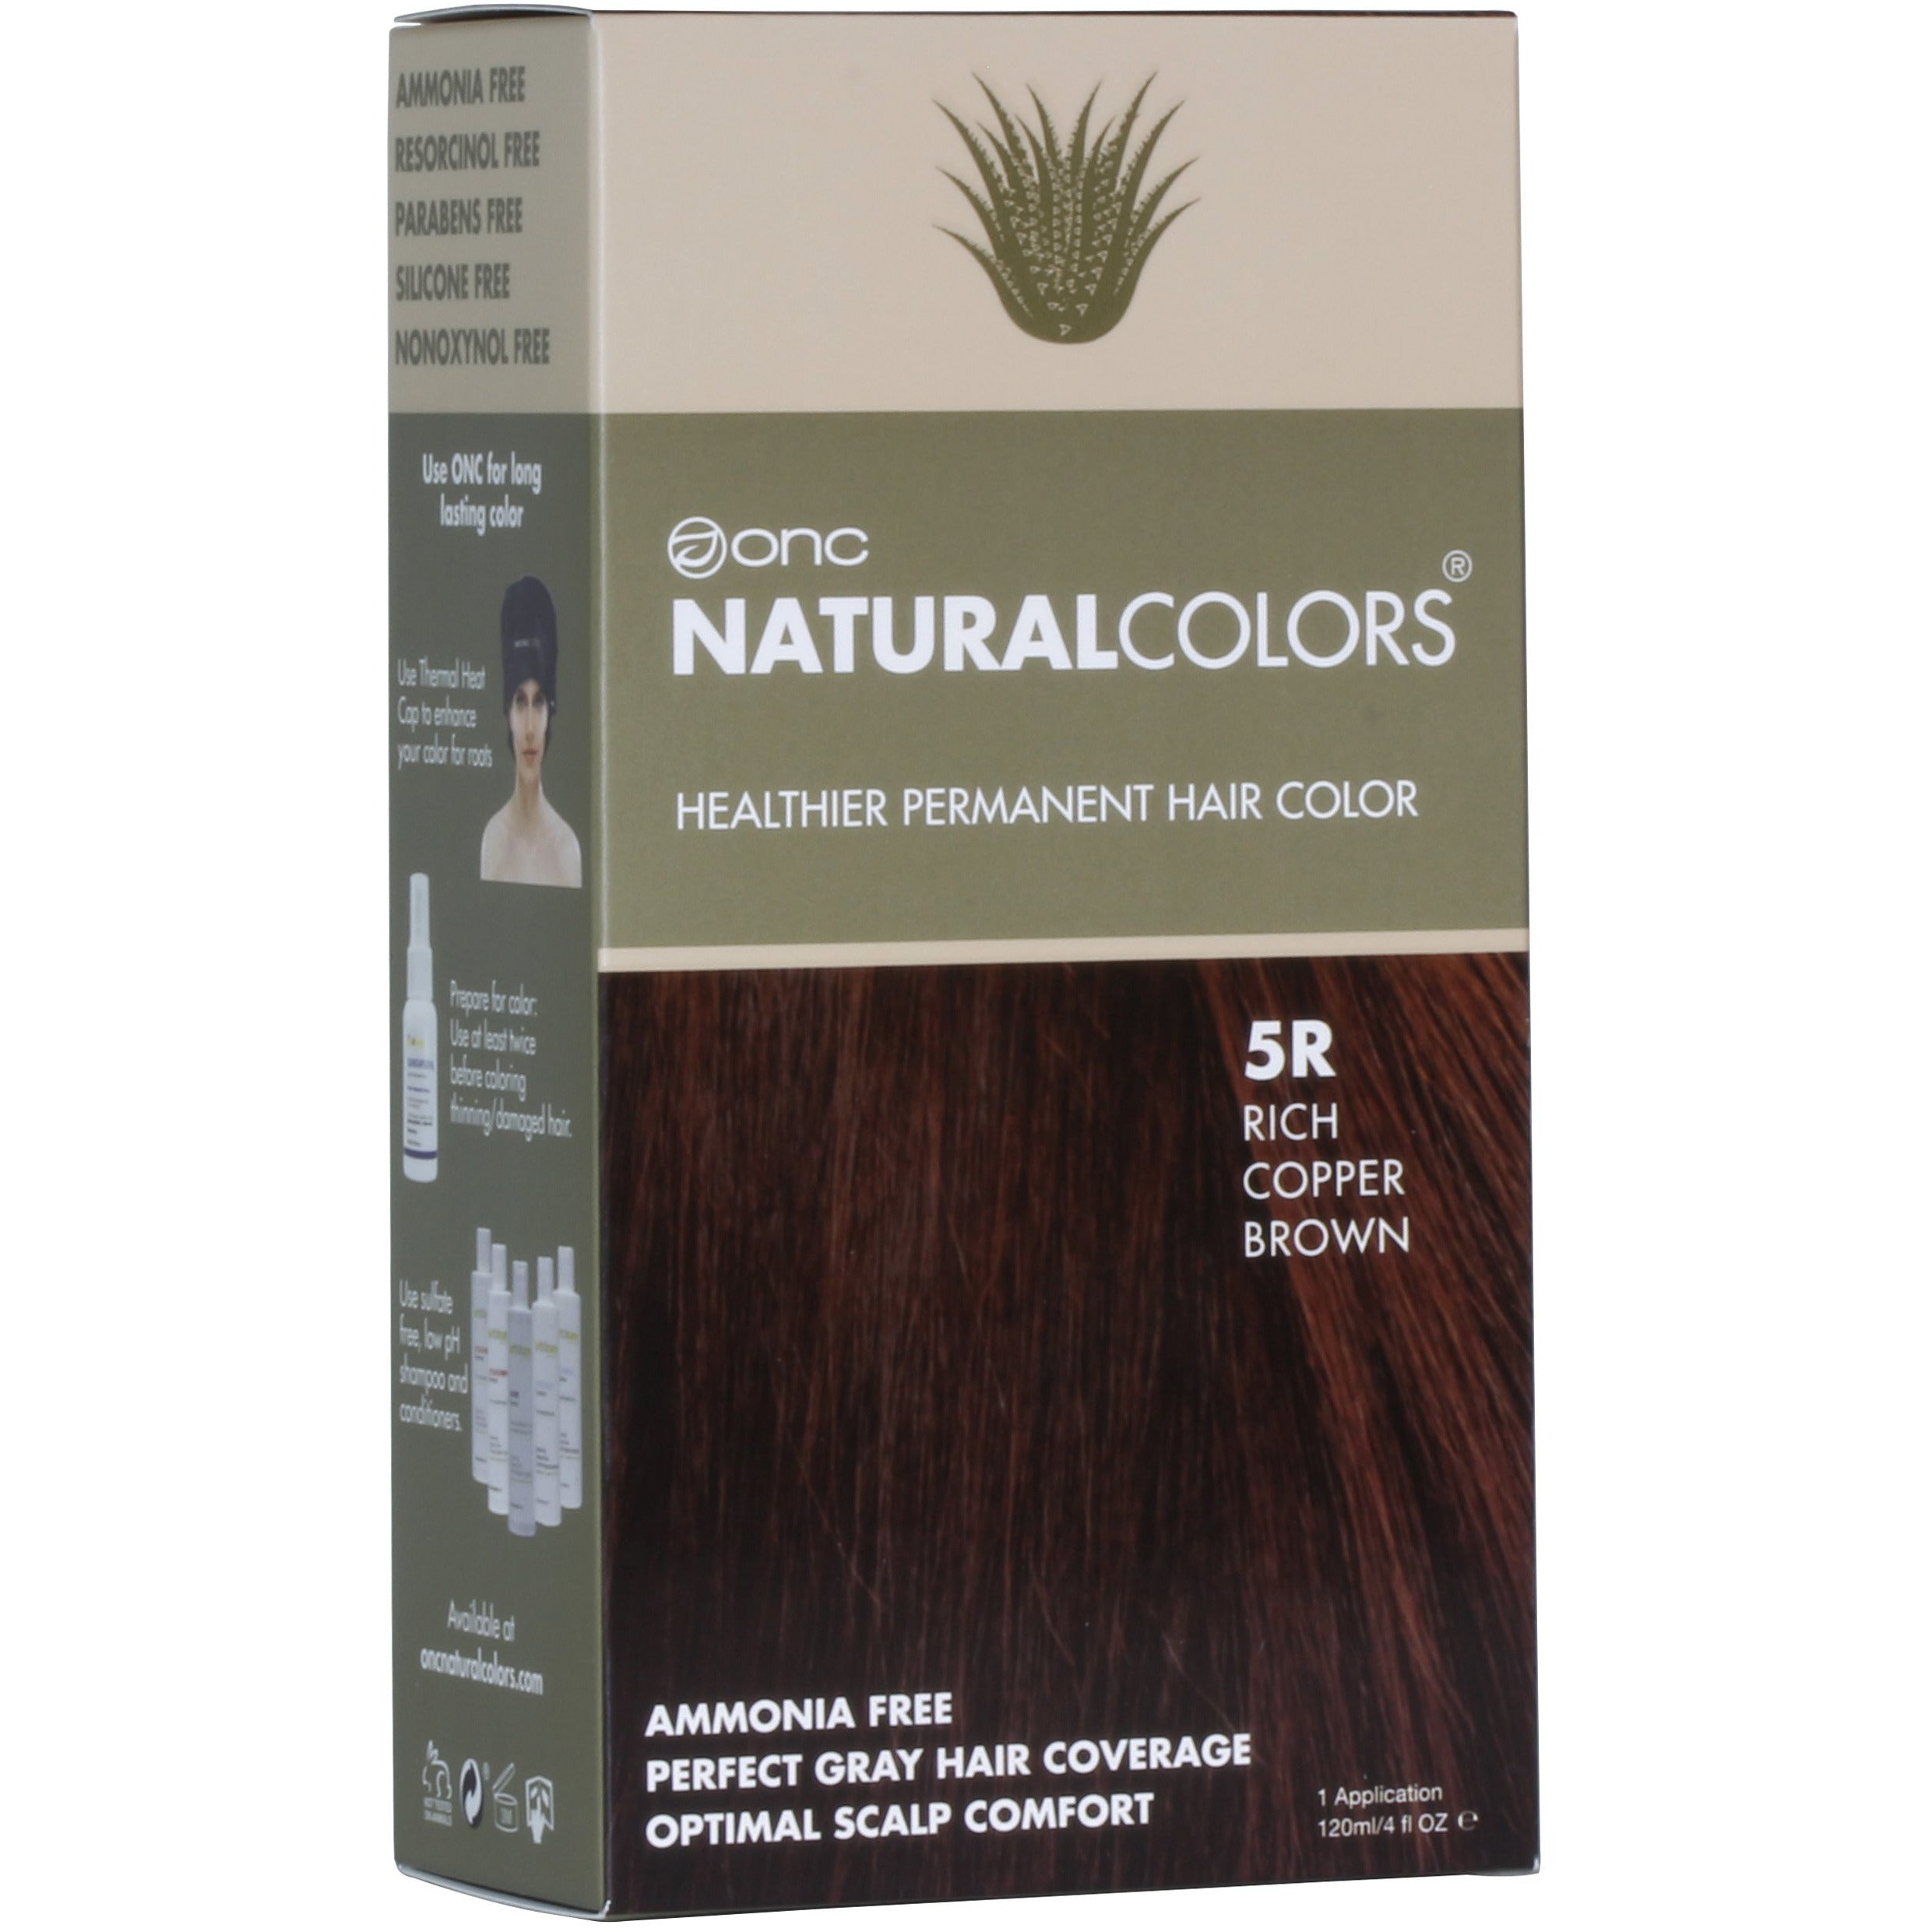 5R Rich Copper Brown Heat Activated Hair Dye With Organic Ingredients - 120 ml (4 fl. oz)